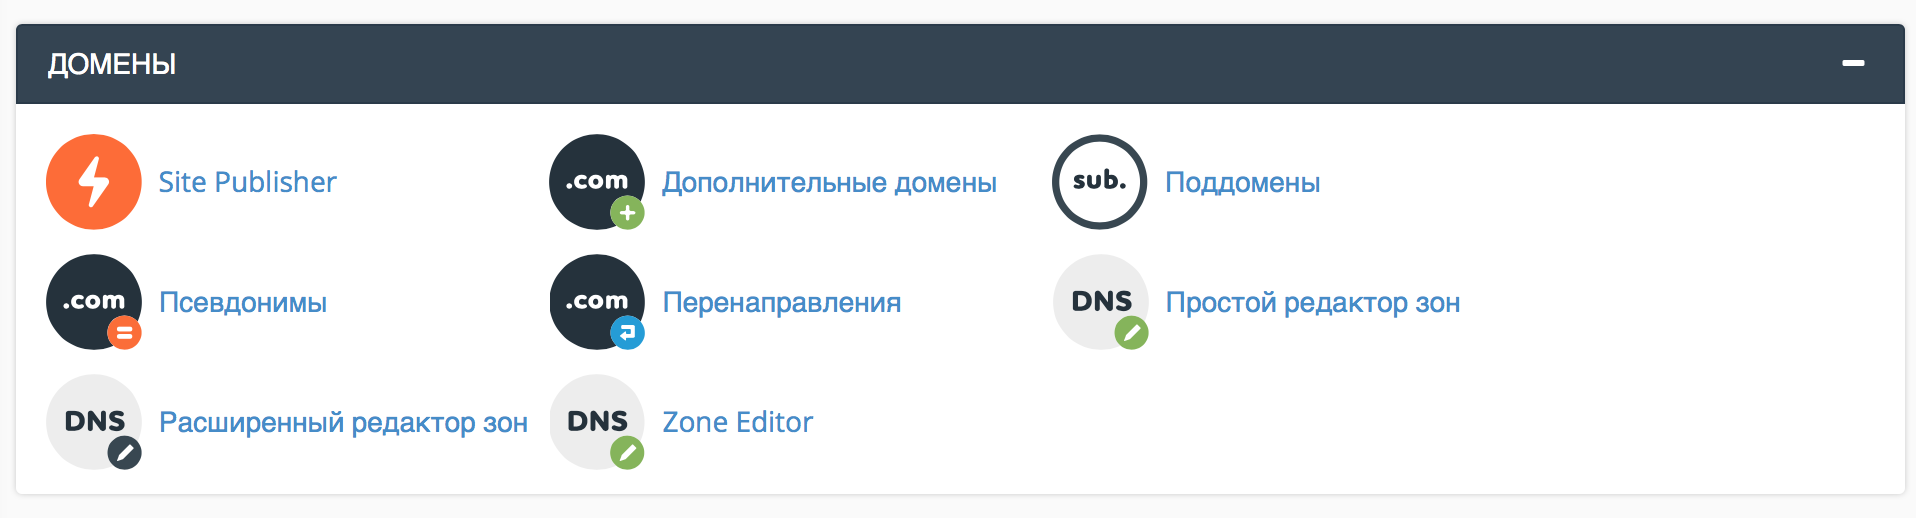 Host forum ru. Control Panel with easy-to-read buttons Bane Mary.